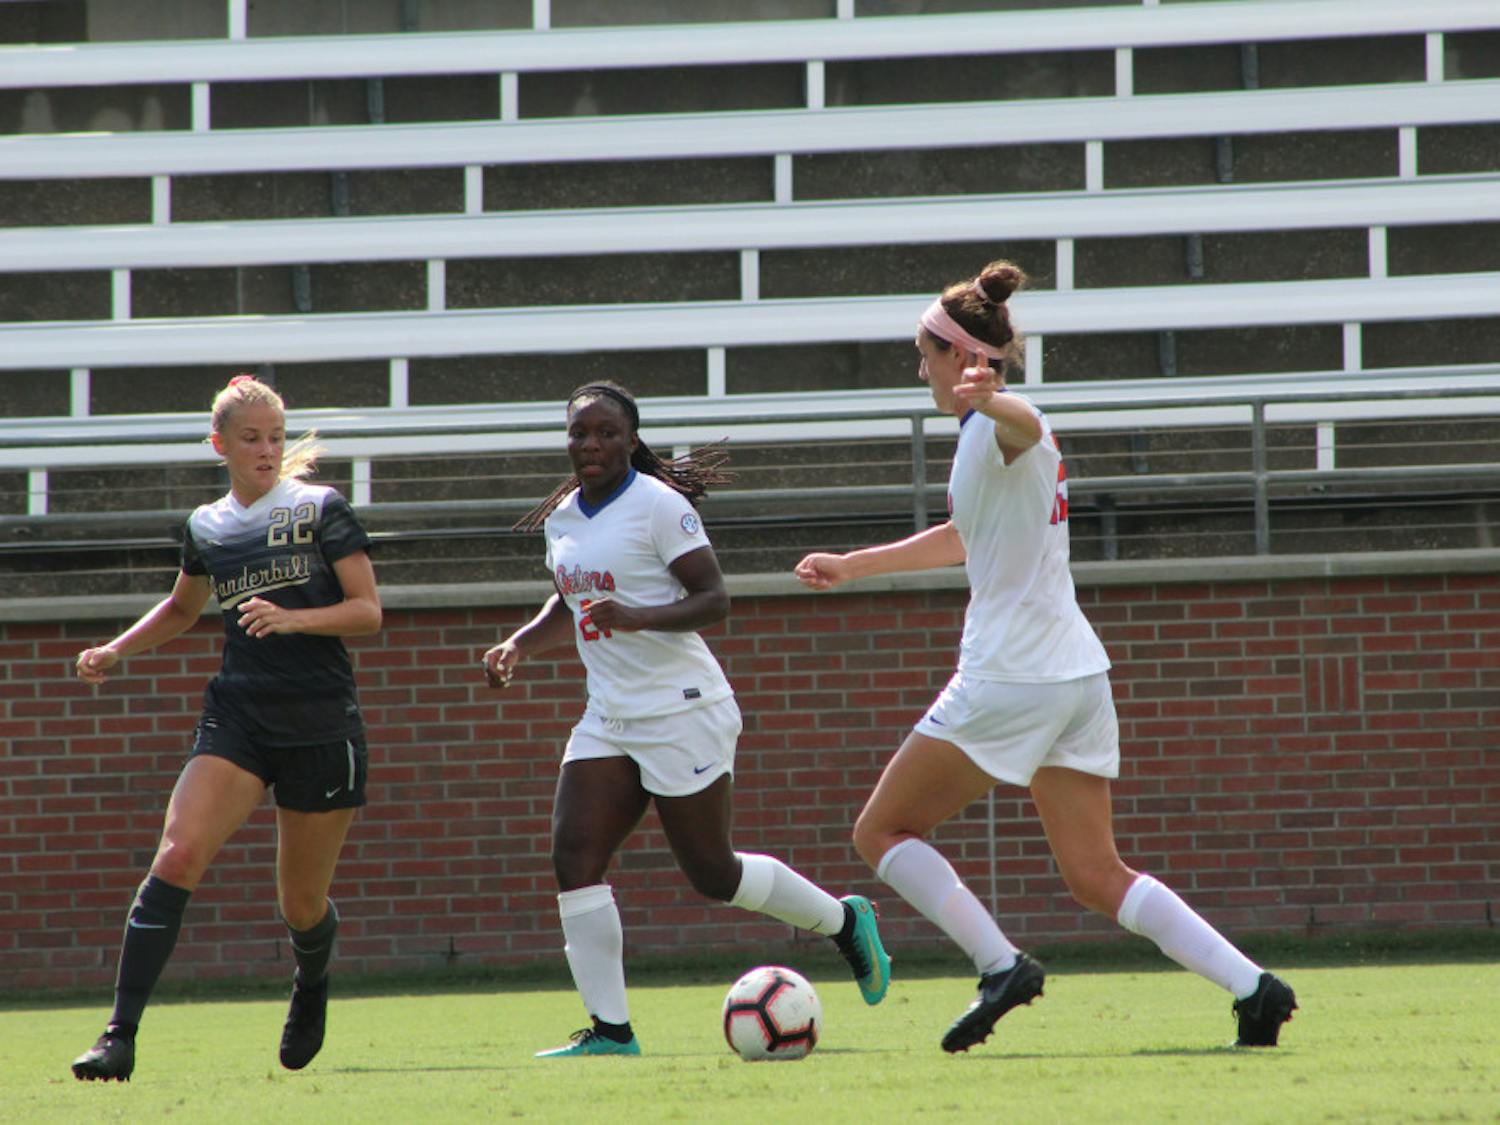 Junior forward Deanne Rose exited Thursday night's game against USC with a hamstring injury. Her status for tonight's game is unclear. She leads the team with three goals. 